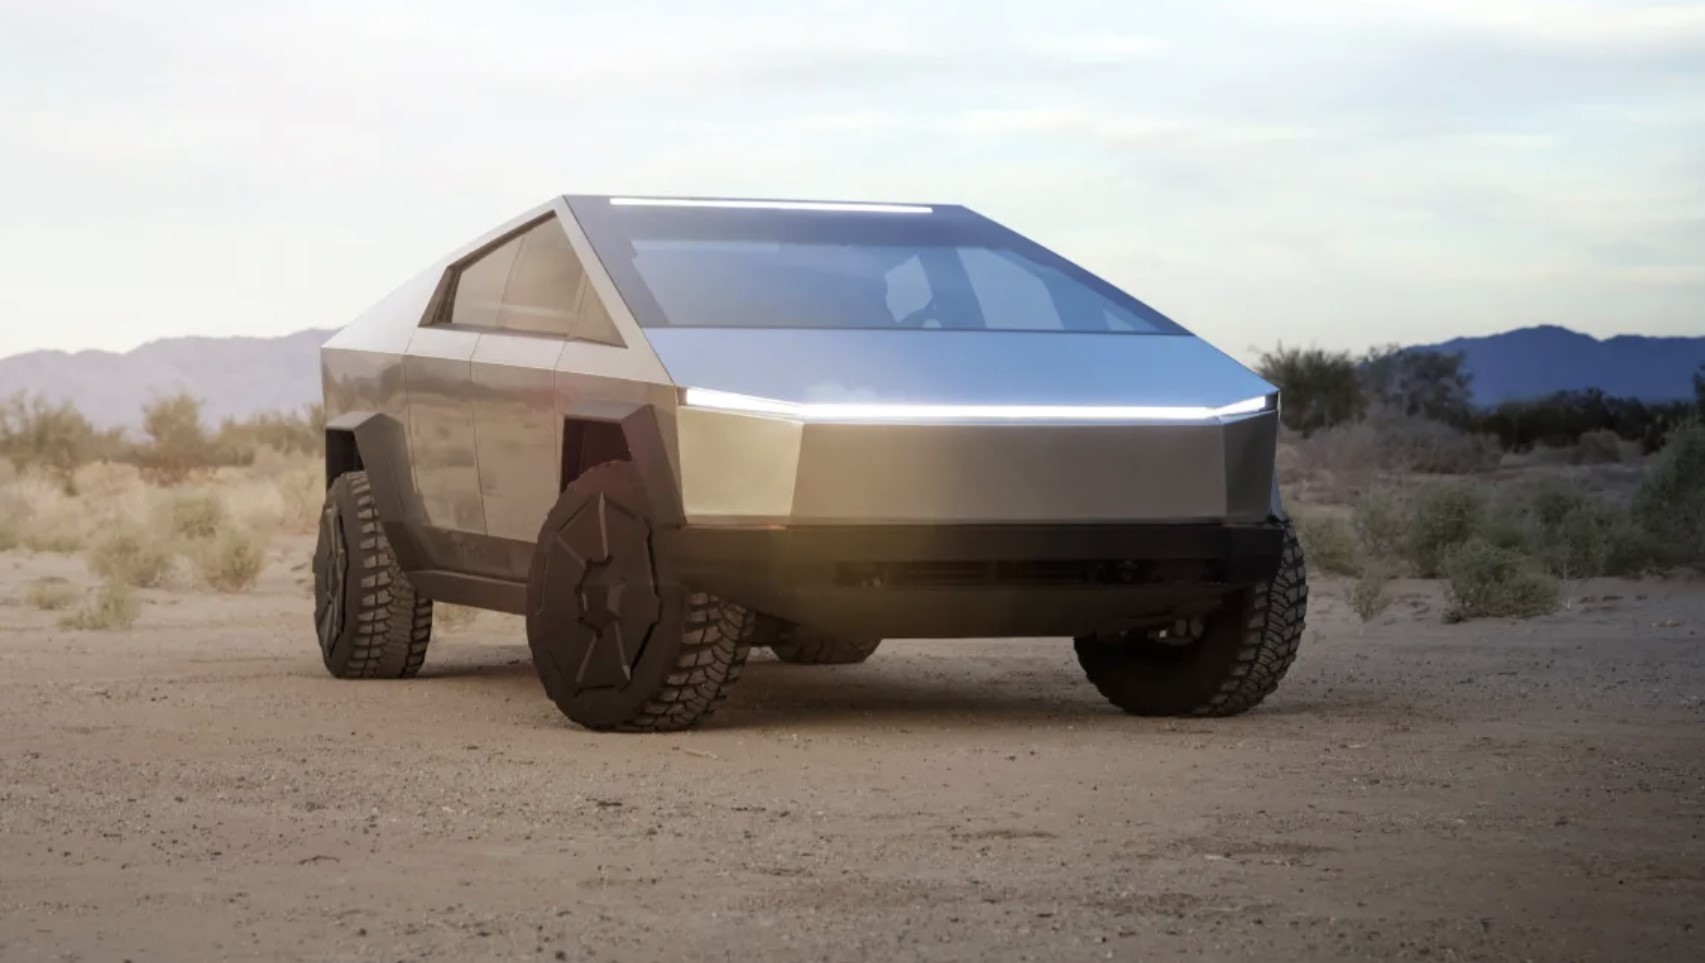 The Tesla Cybertruck parked in the sand